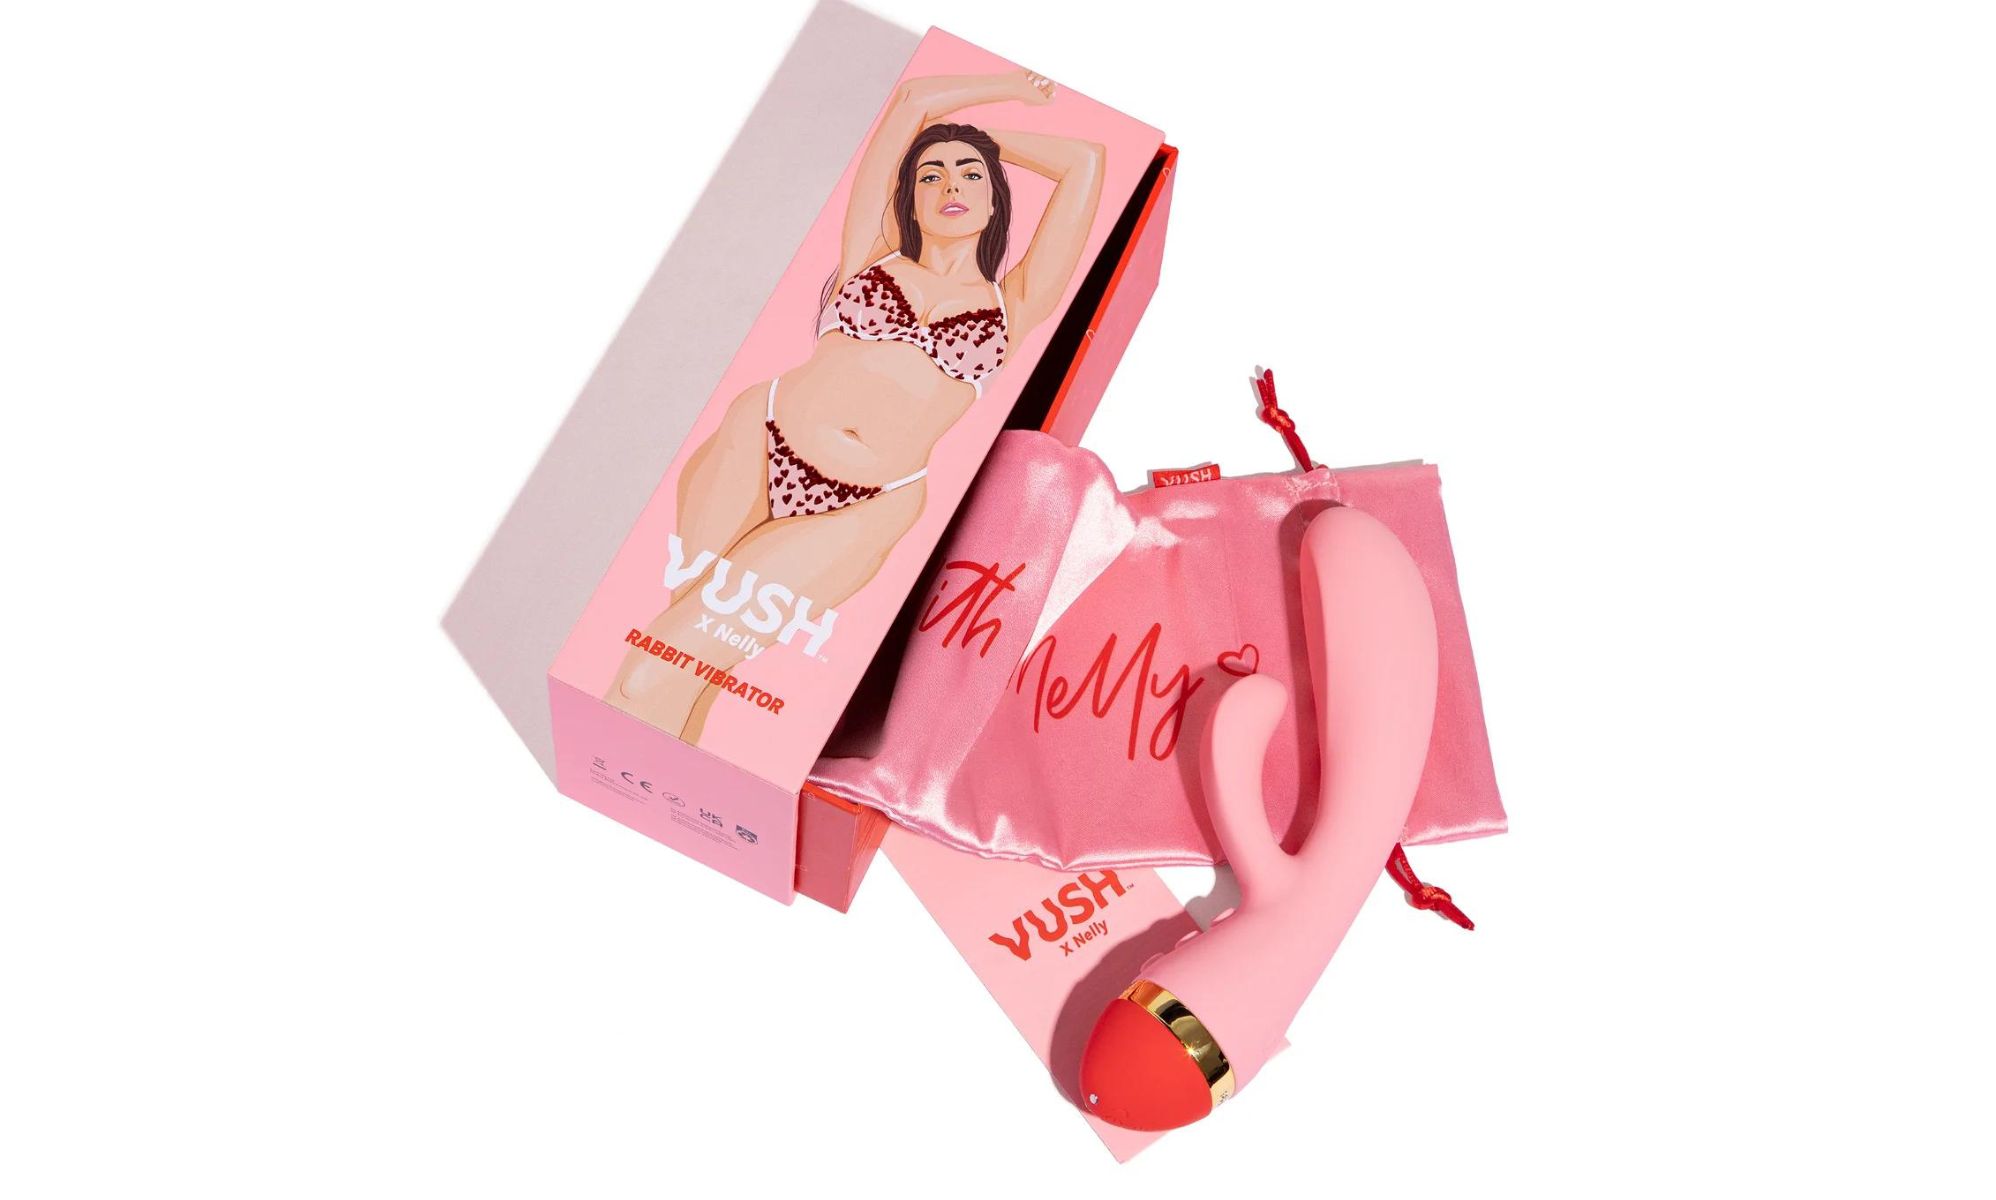 VUSH teams up with Nelly London on new vibrator customers are 'obsessed'  with